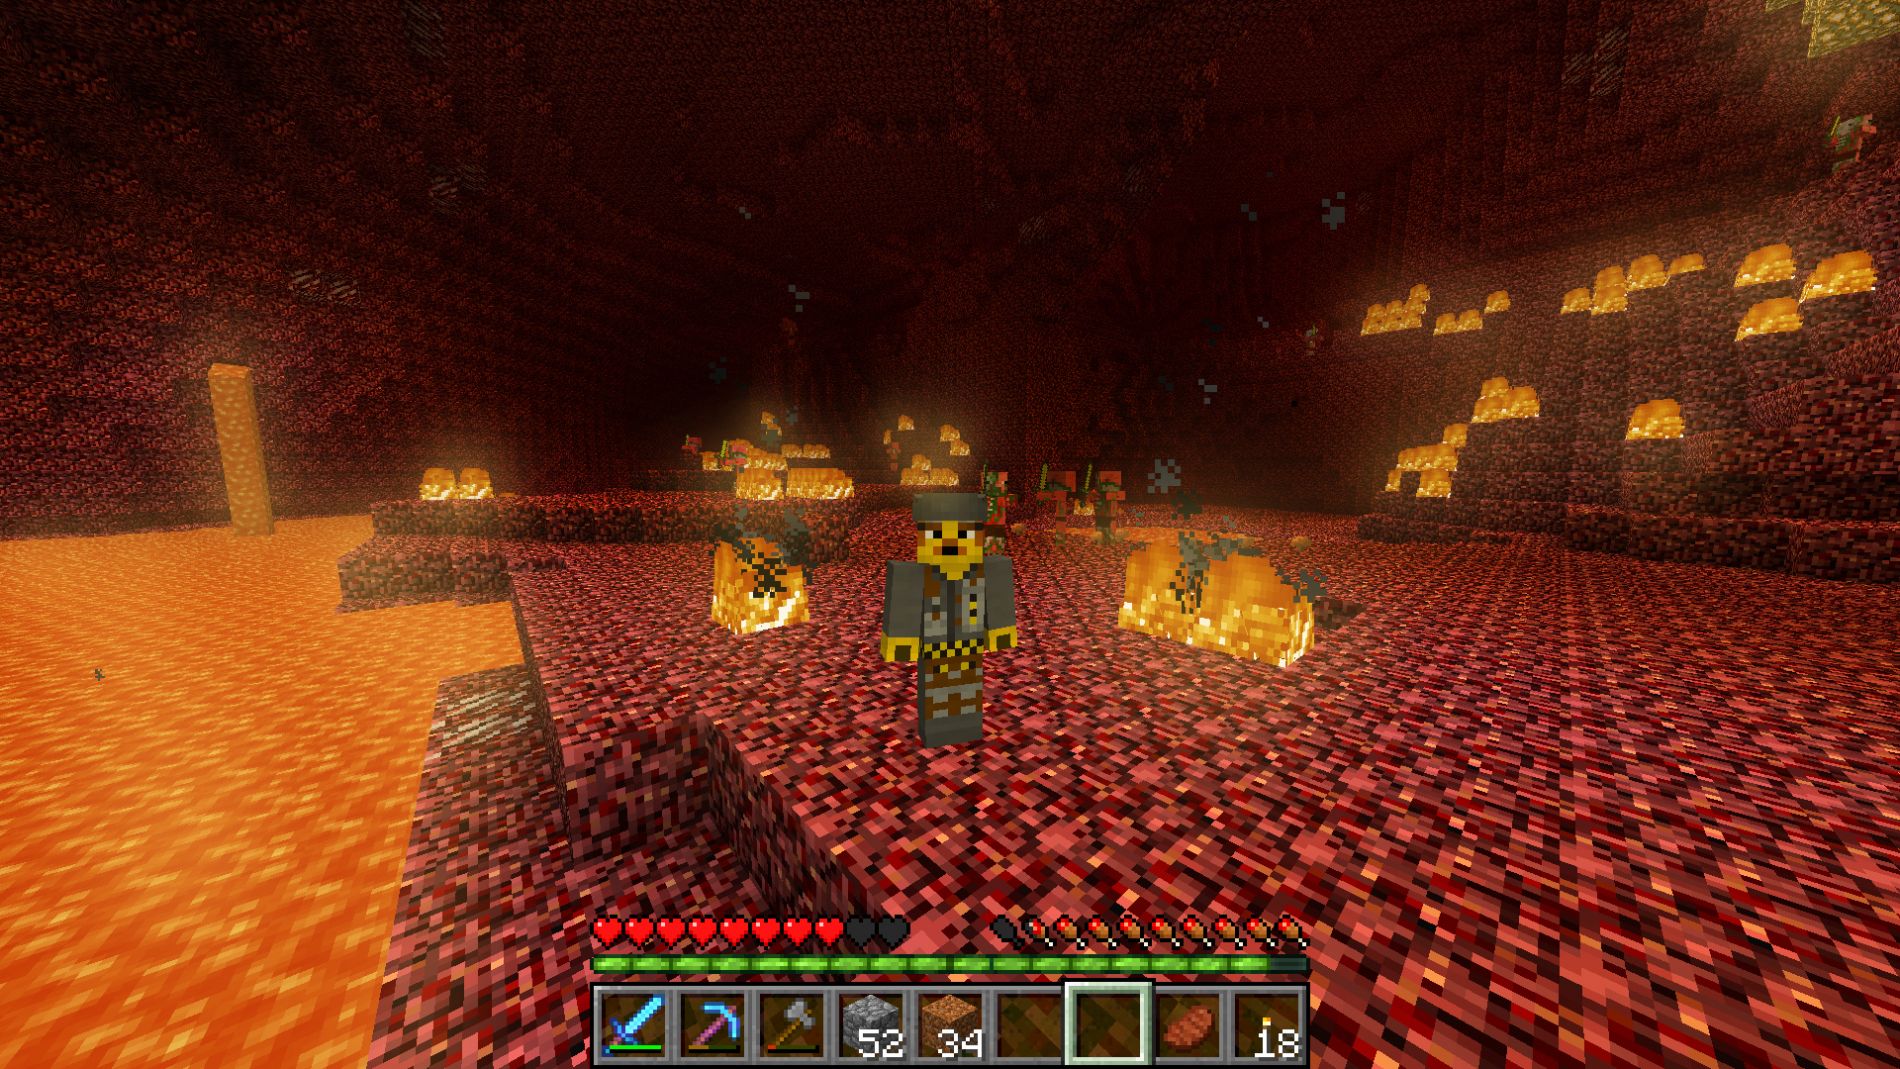 The Nether Photoshop'd